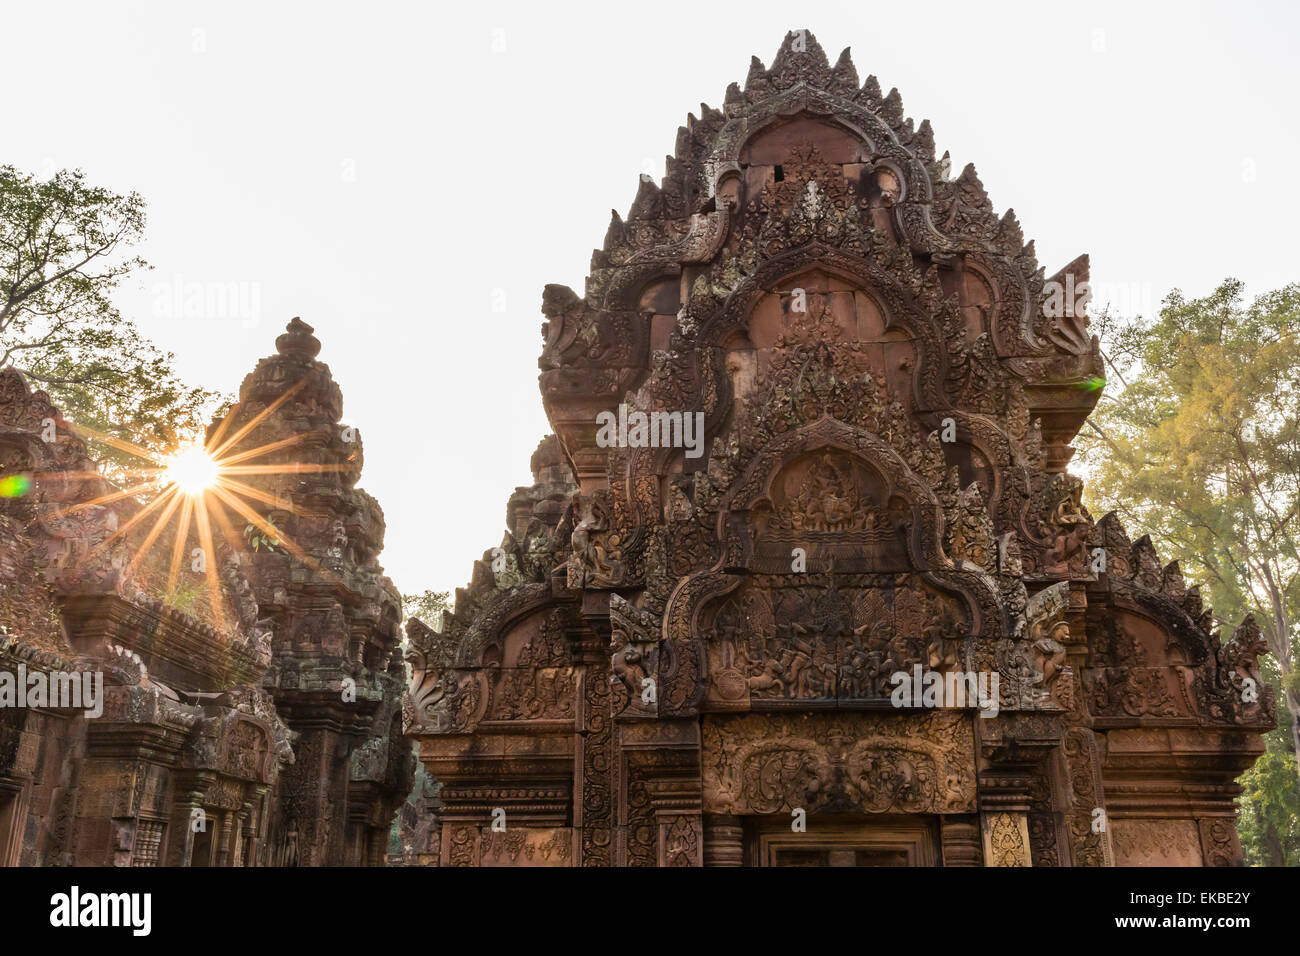 Ornate carvings in red sandstone at sunset in Banteay Srei Temple in Angkor, UNESCO, Siem Reap, Cambodia, Indochina, Asia Stock Photo